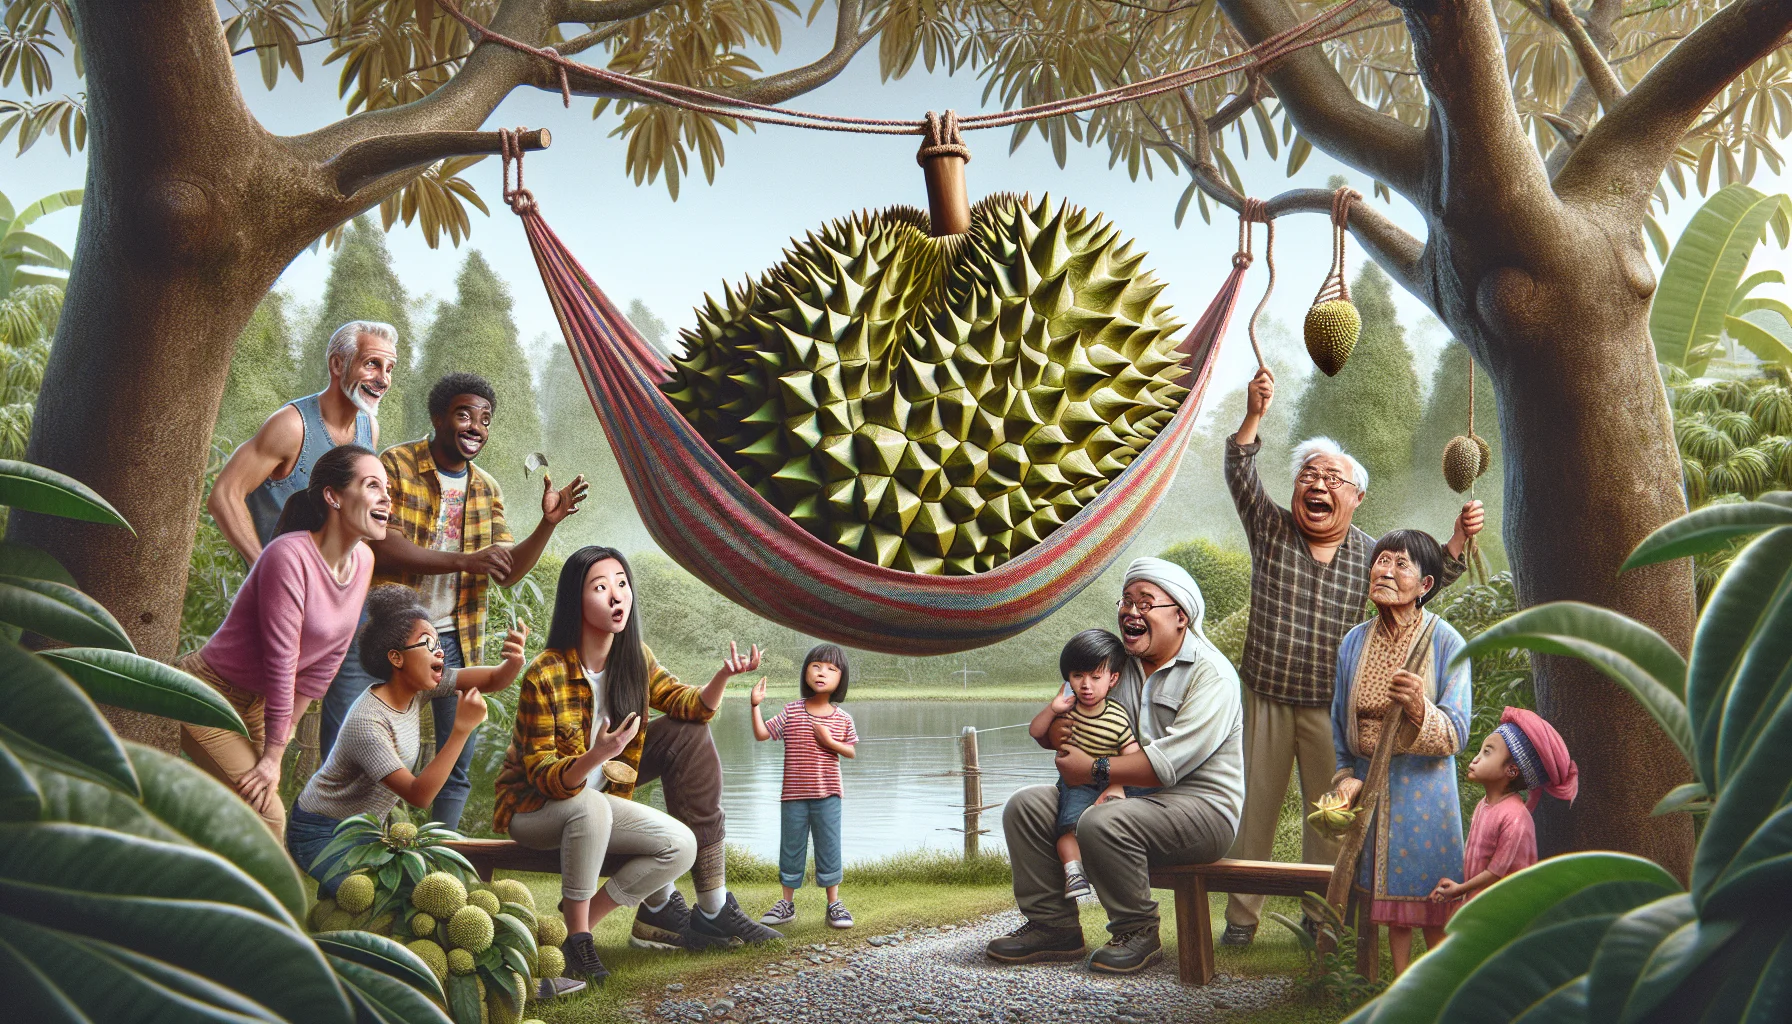 Imagine a comical gardening scenario where unusual, spiky, or 'spiney' fruits are the stars of the show. In the heart of the garden, there's a large, robust, spiky durian suspended in a hammock tied between two tree branches. A diverse group of people, consisting of a Caucasian woman, a Black man, a South Asian child, and a Middle-Eastern elderly man, can be seen gathered around it in fascination and amusement. Their expressions are ones of surprise, laughter, and curious delight. This scene communicates the charm and joy of gardening, encouraging garden enthusiasts to appreciate even its most bizarre offerings.